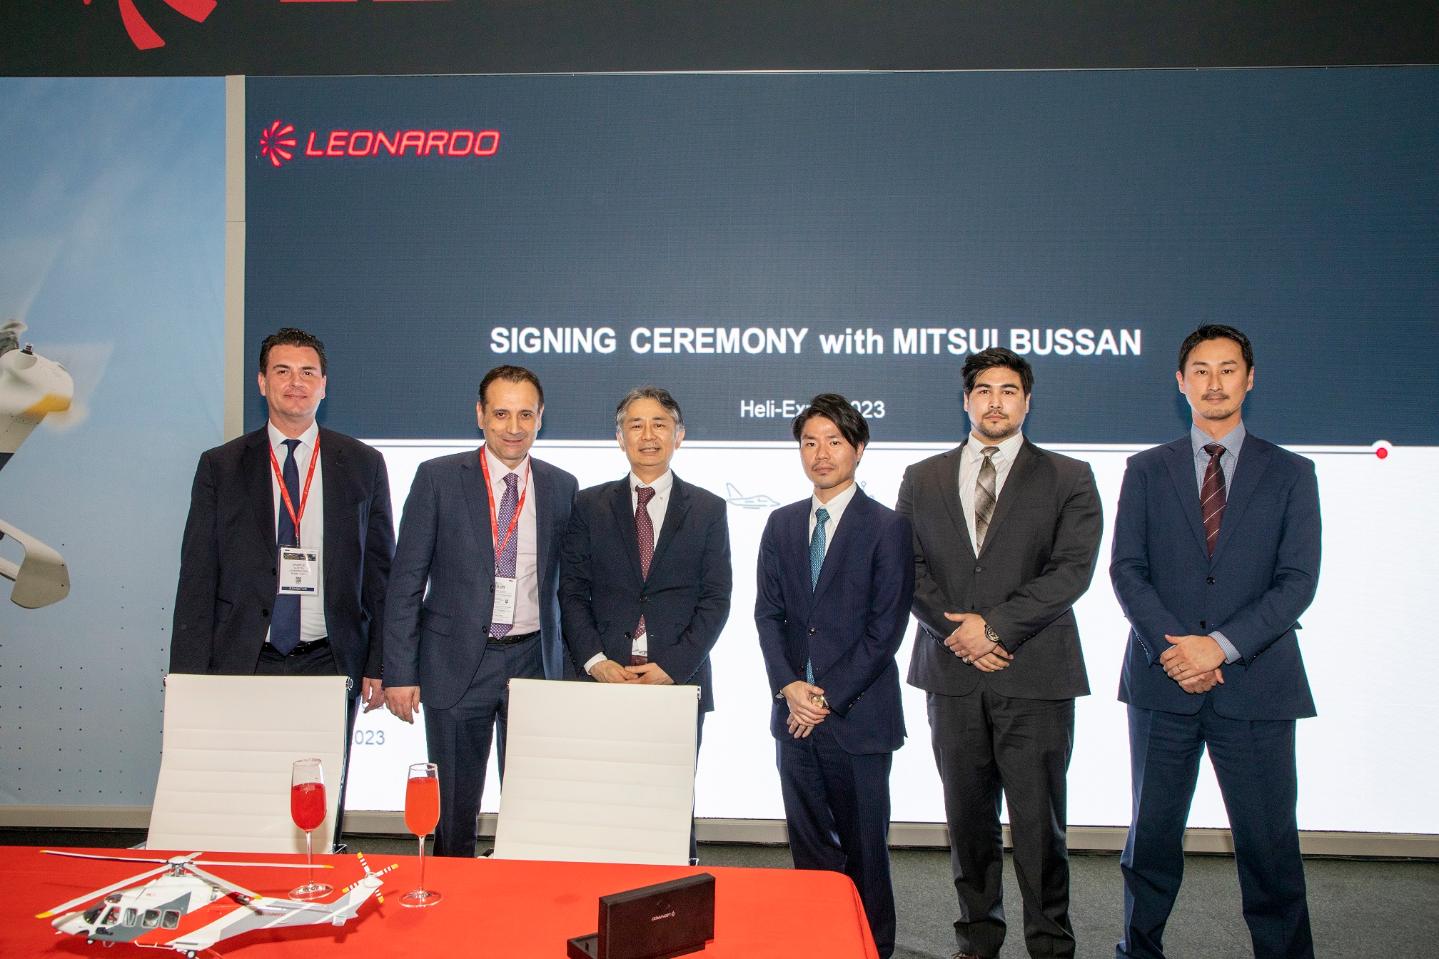 Mitsui Bussan - Heli-Expo 2023 signing ceremony (2)